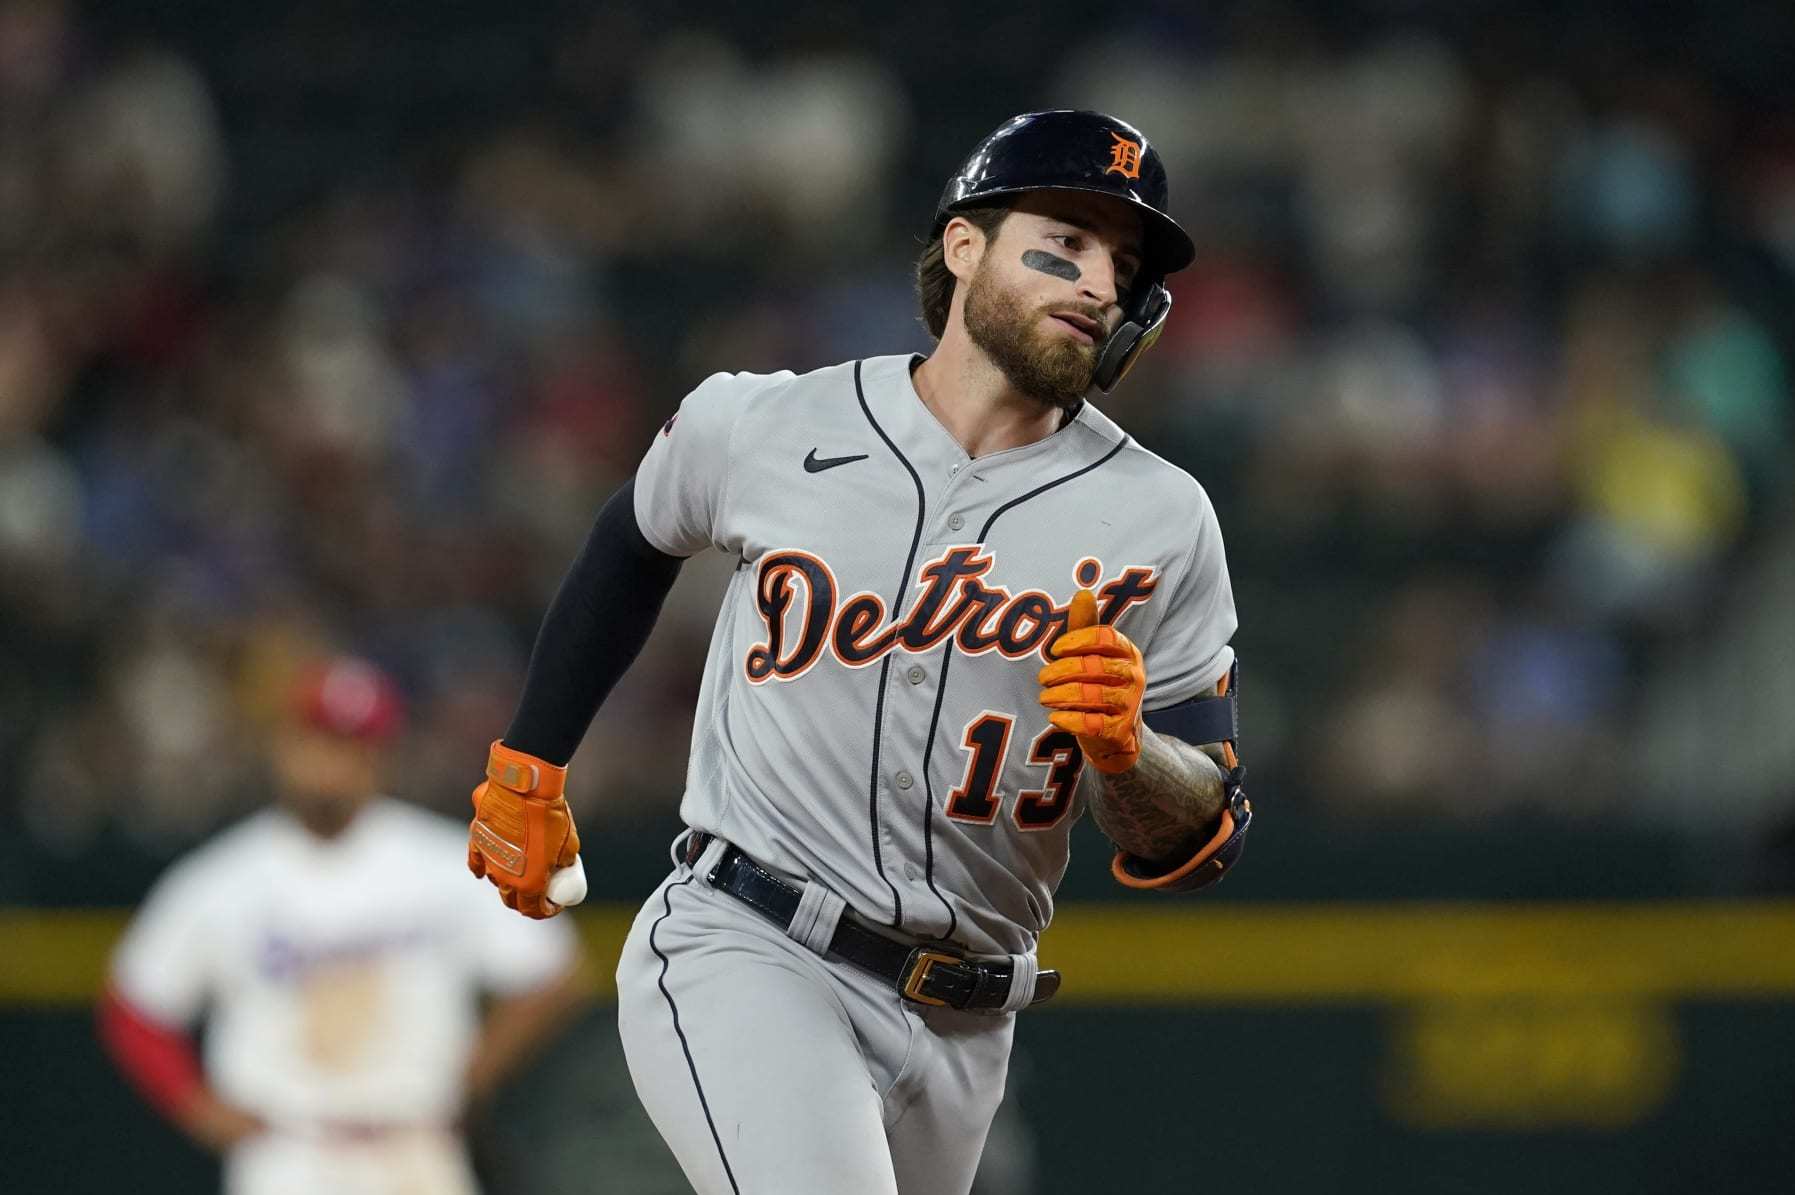 Tigers' C.J. Cron helped off field after knee injury 